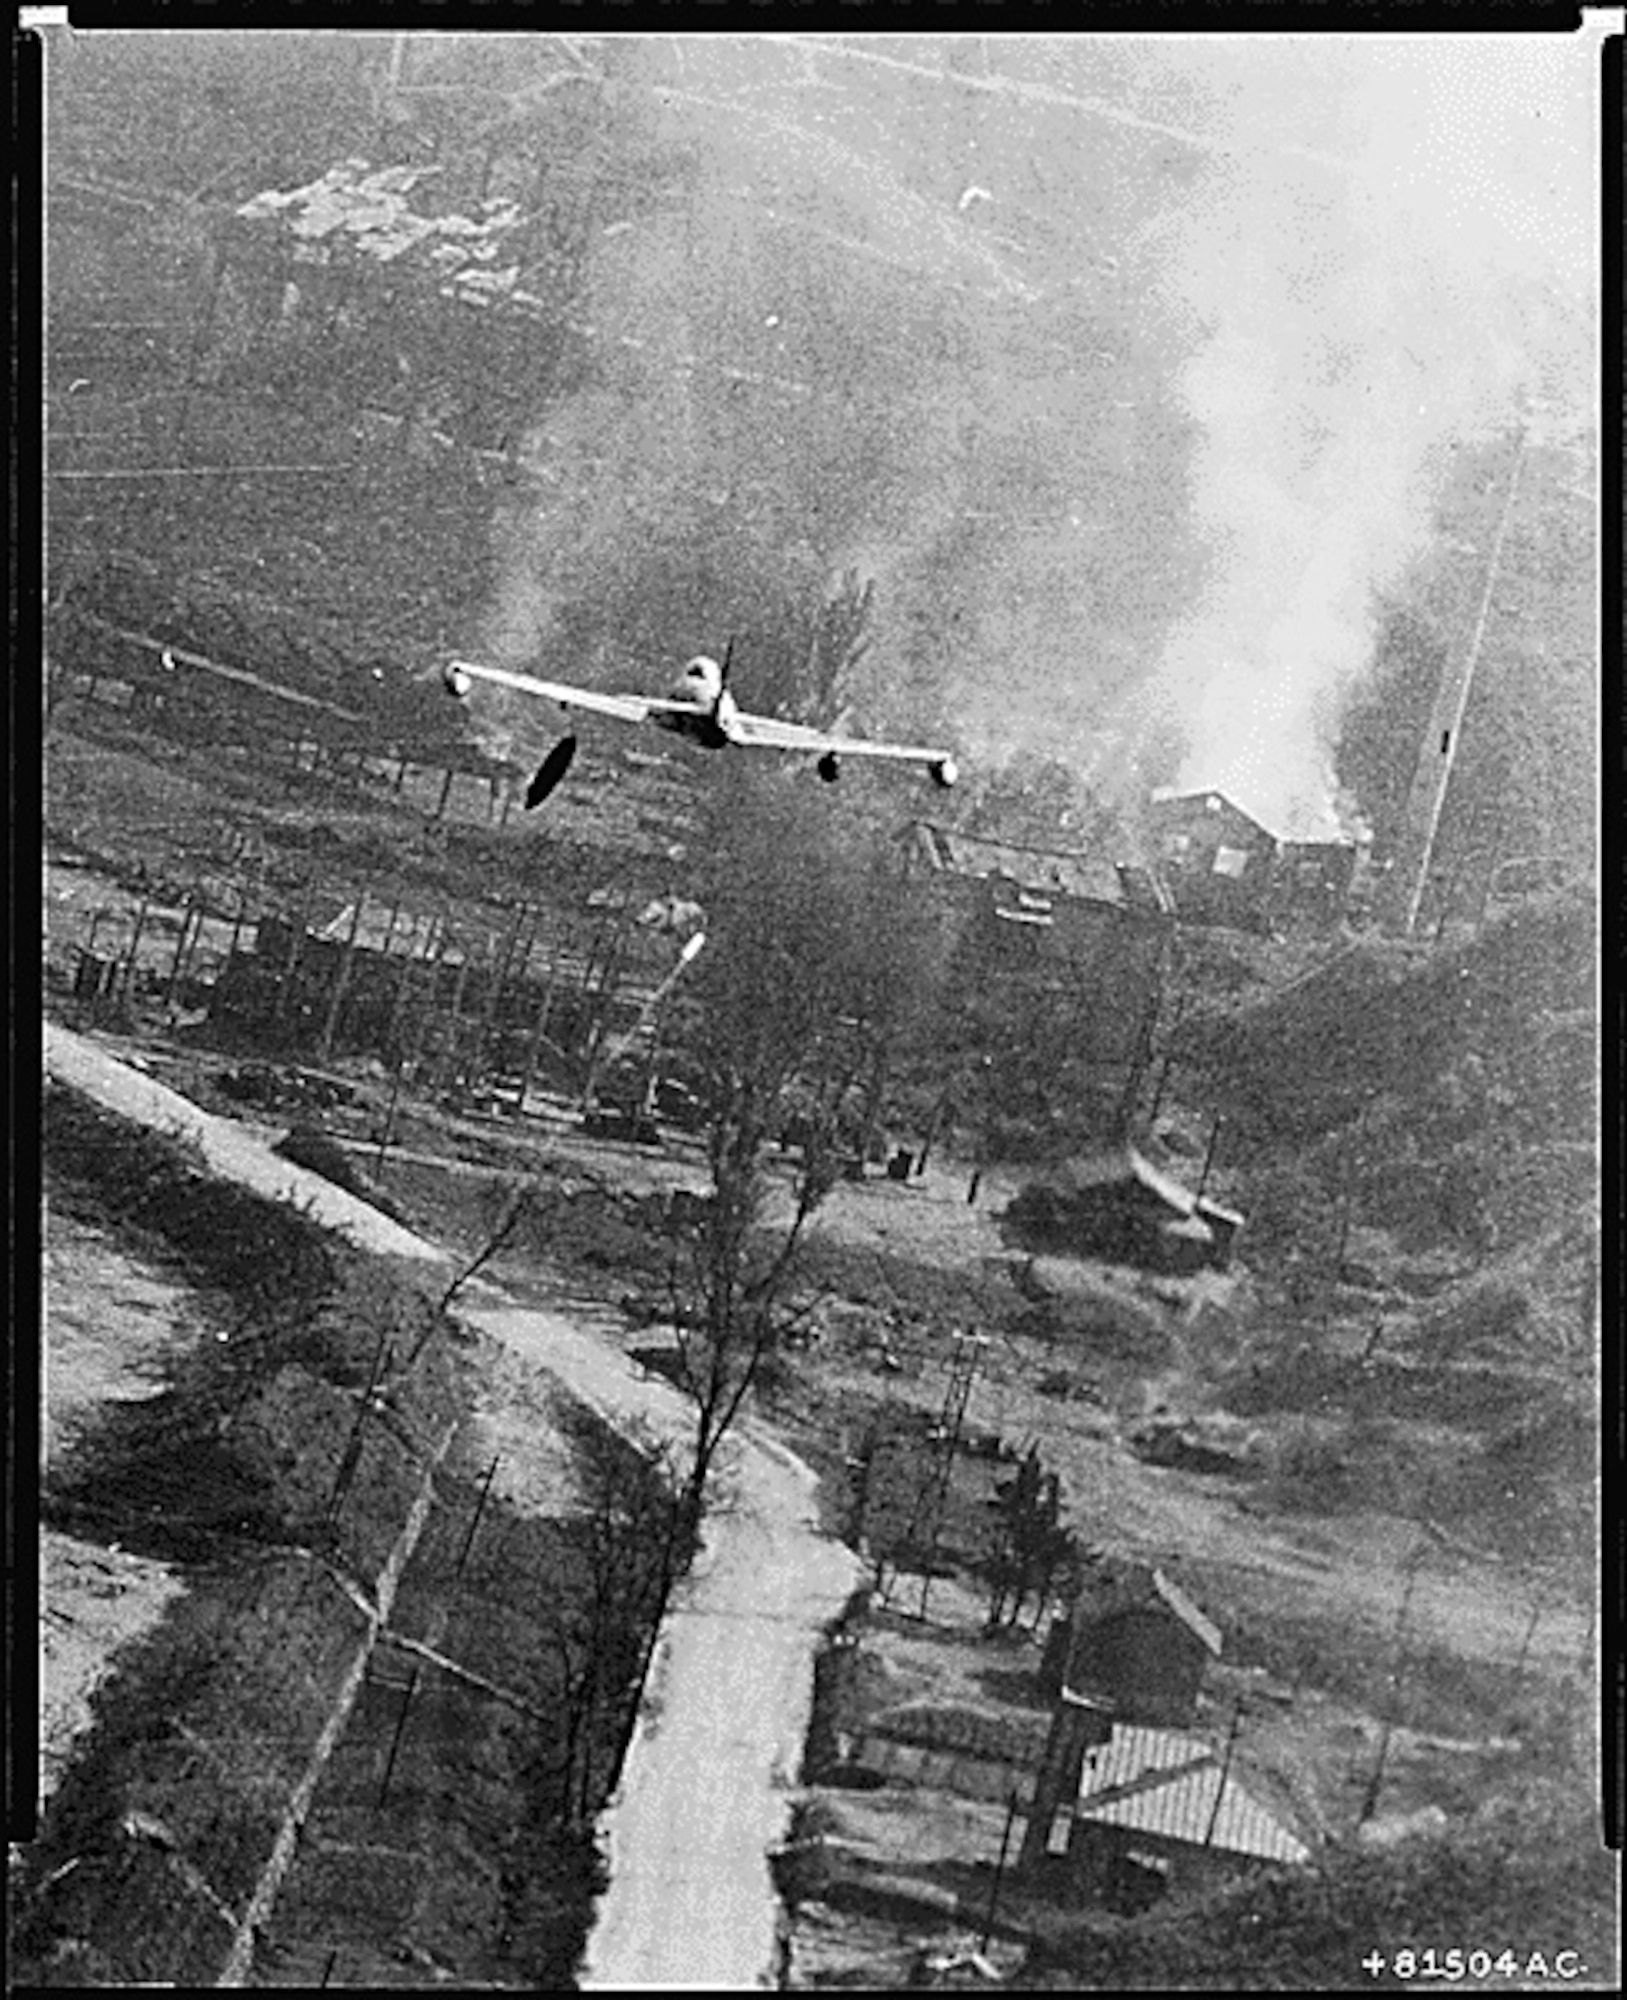 An Air Force F-80 Shooting Star fighter-bomber involved in an air strike over Suan, North Korea, in the largest air strike of the Korean Conflict on May 8, 1952 (Courtesy of the National Archives and Records Administration)
